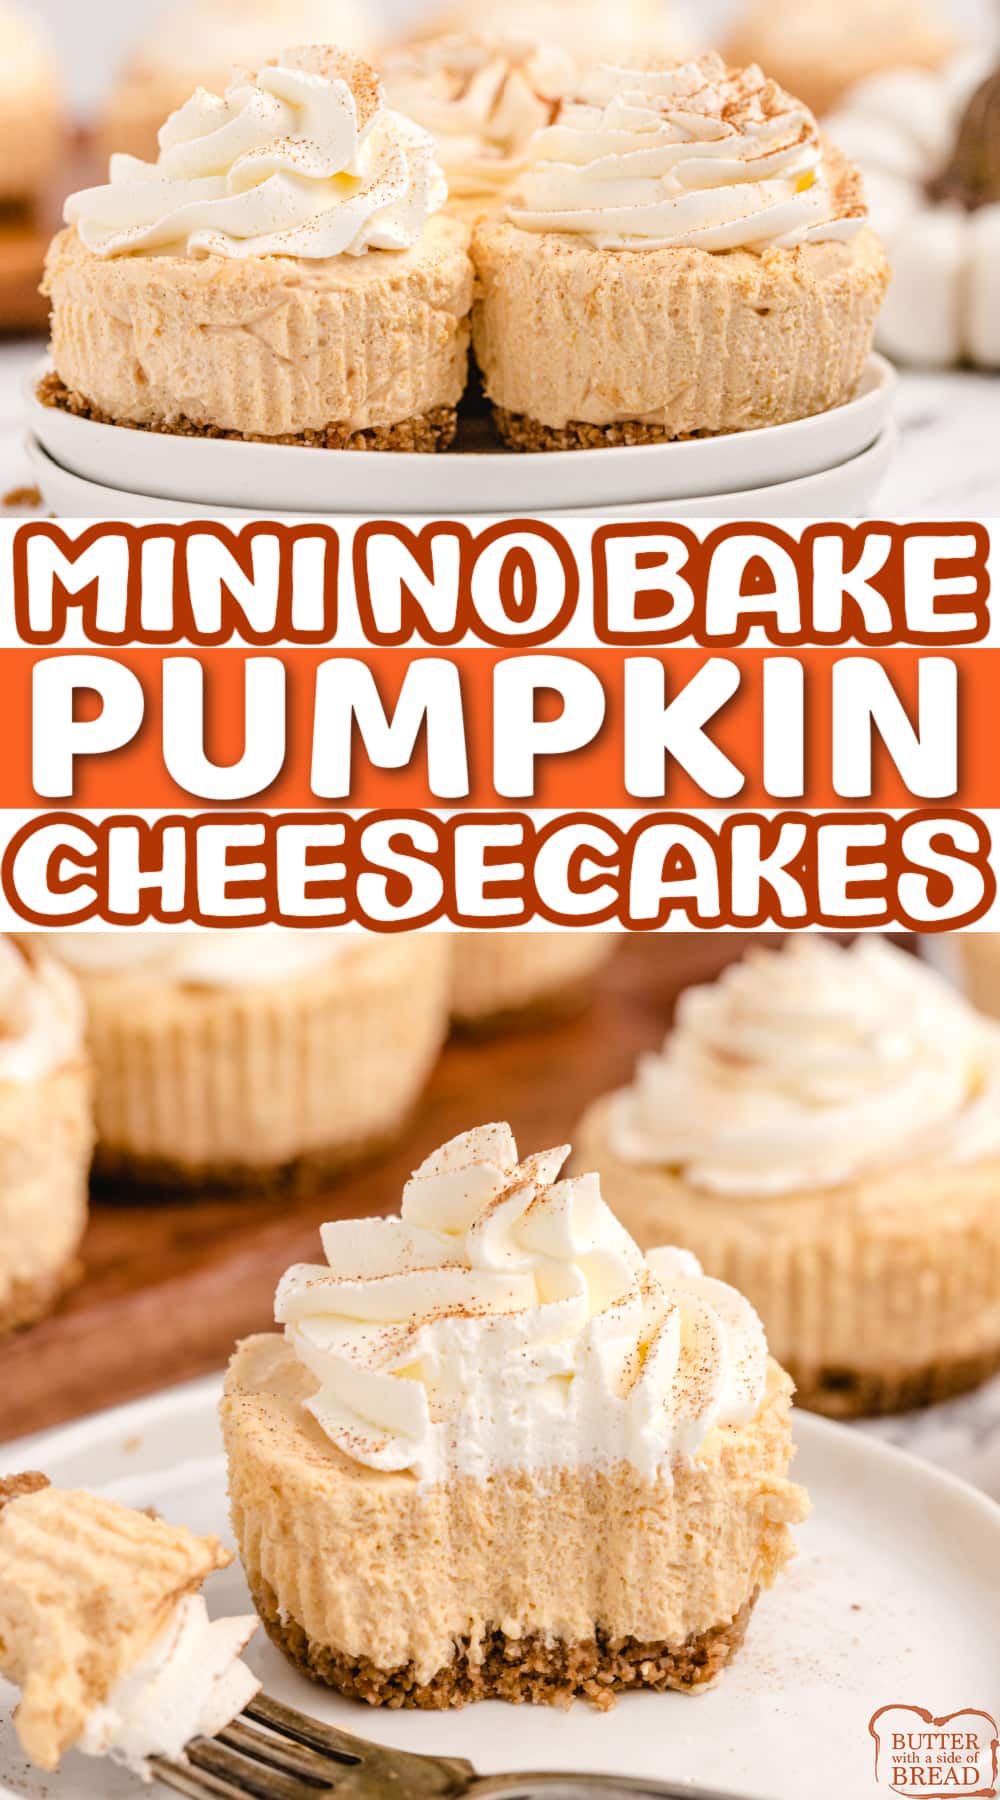 Mini No Bake Pumpkin Cheesecakes are the perfect fall dessert! Made with a simple granola bar crust and a delicious pumpkin filling made with only 5 ingredients. 